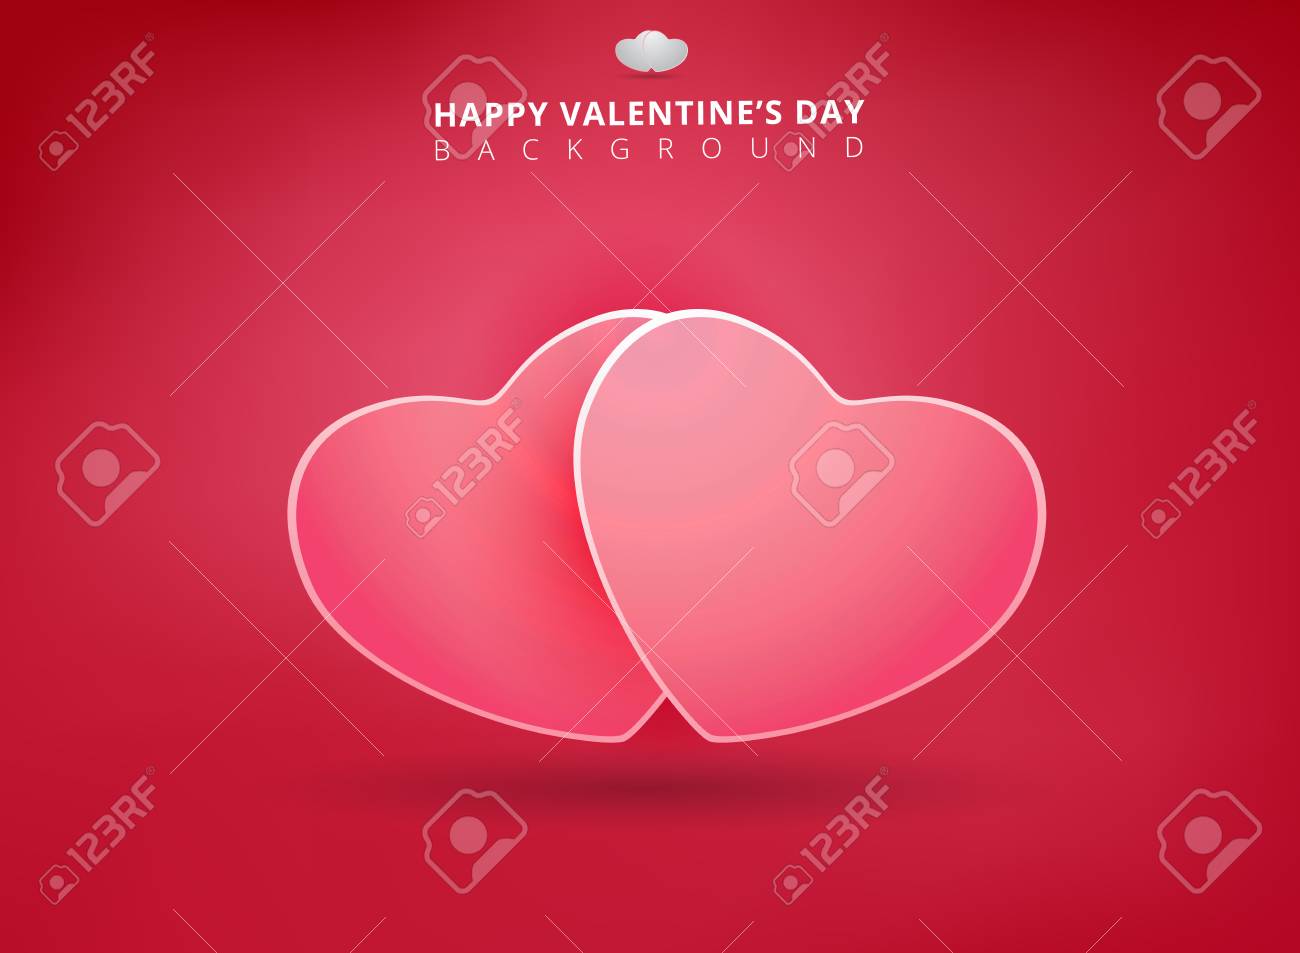 Happy Valentines Day On Pink Background With Twin Hearts Vector